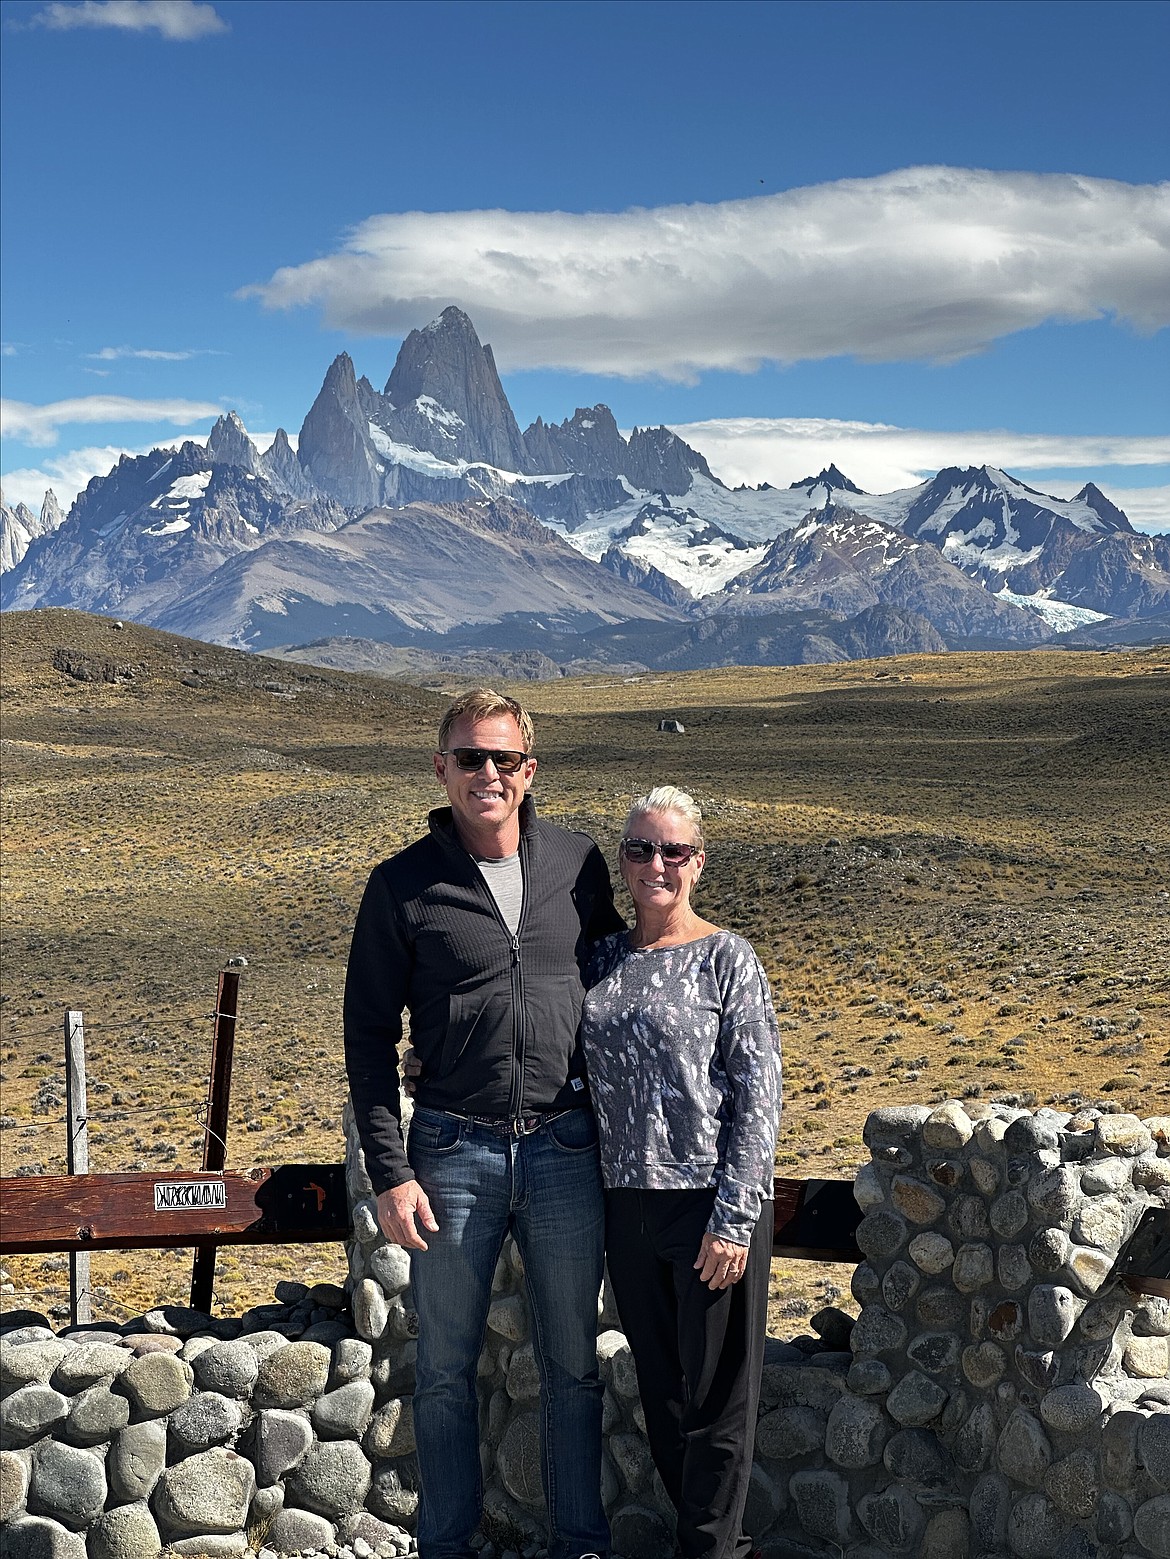 David and Rebecca Kilmer will give a presentation on their recent travels in Argentina on June 13 as part of the Coeur d’Alene Public Library’s Novel Destination series.